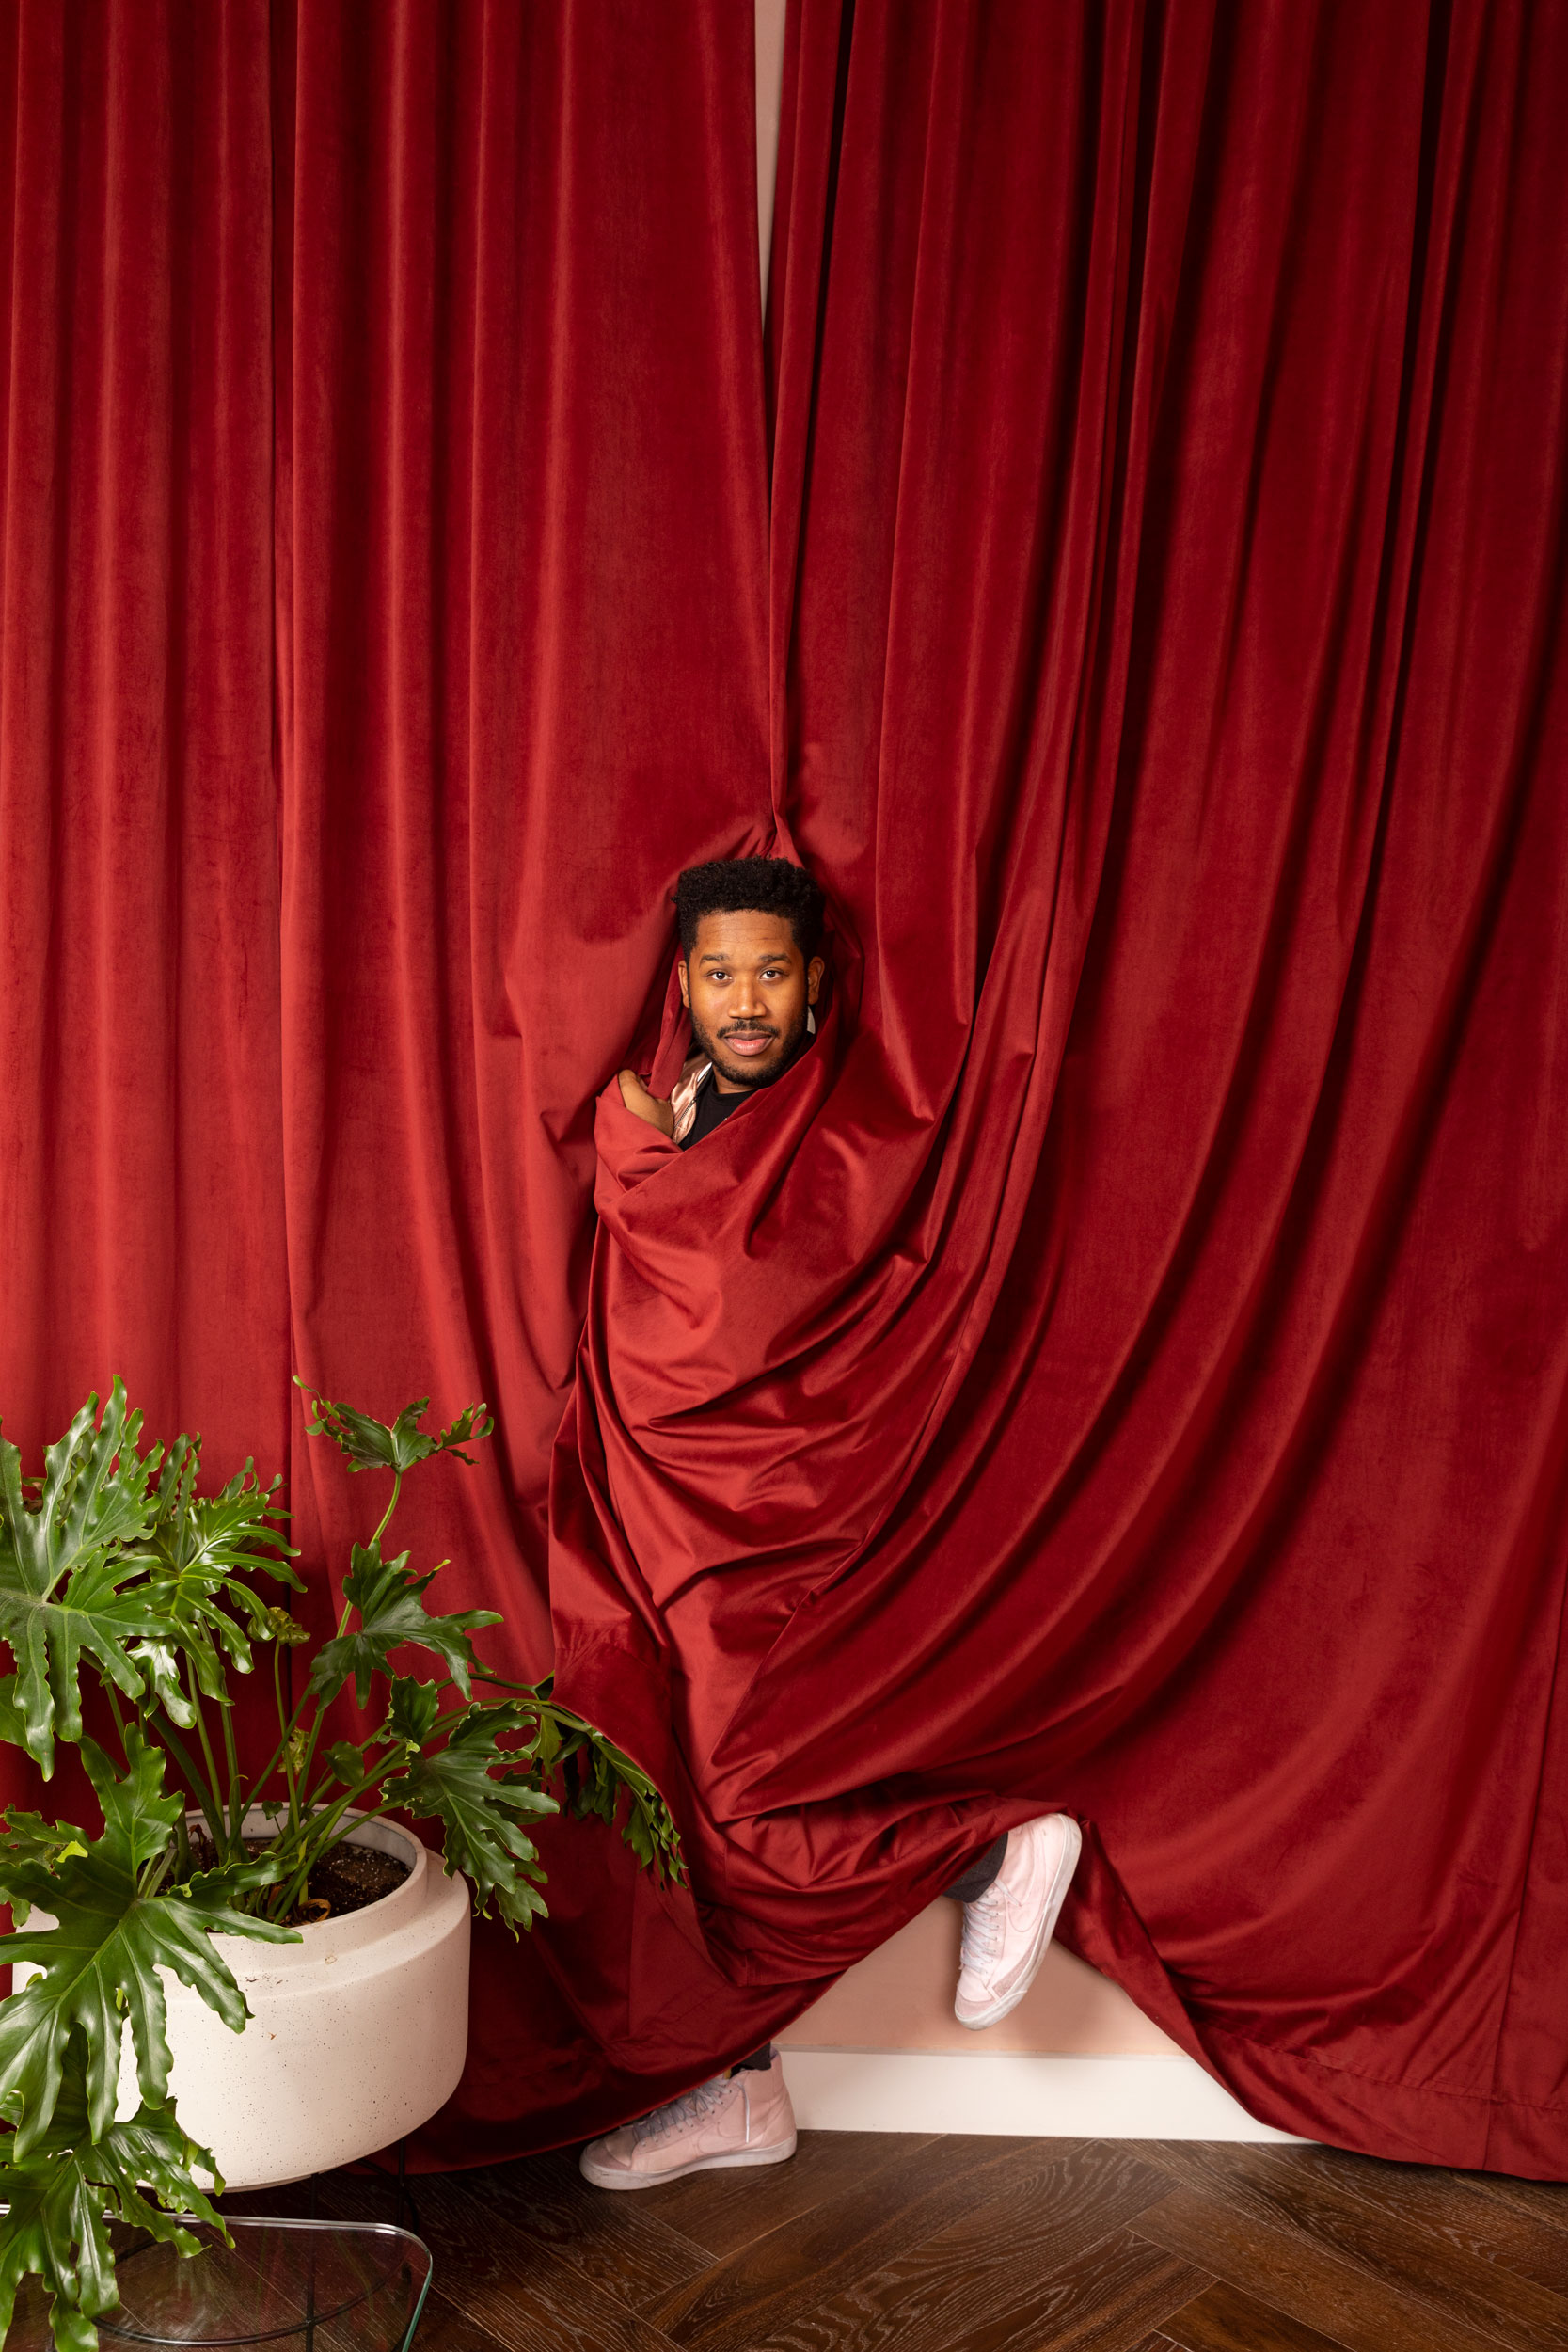 Millennial influencer wrapped in a red curtain. Kim Genevieve Los Angeles Portrait Photographer